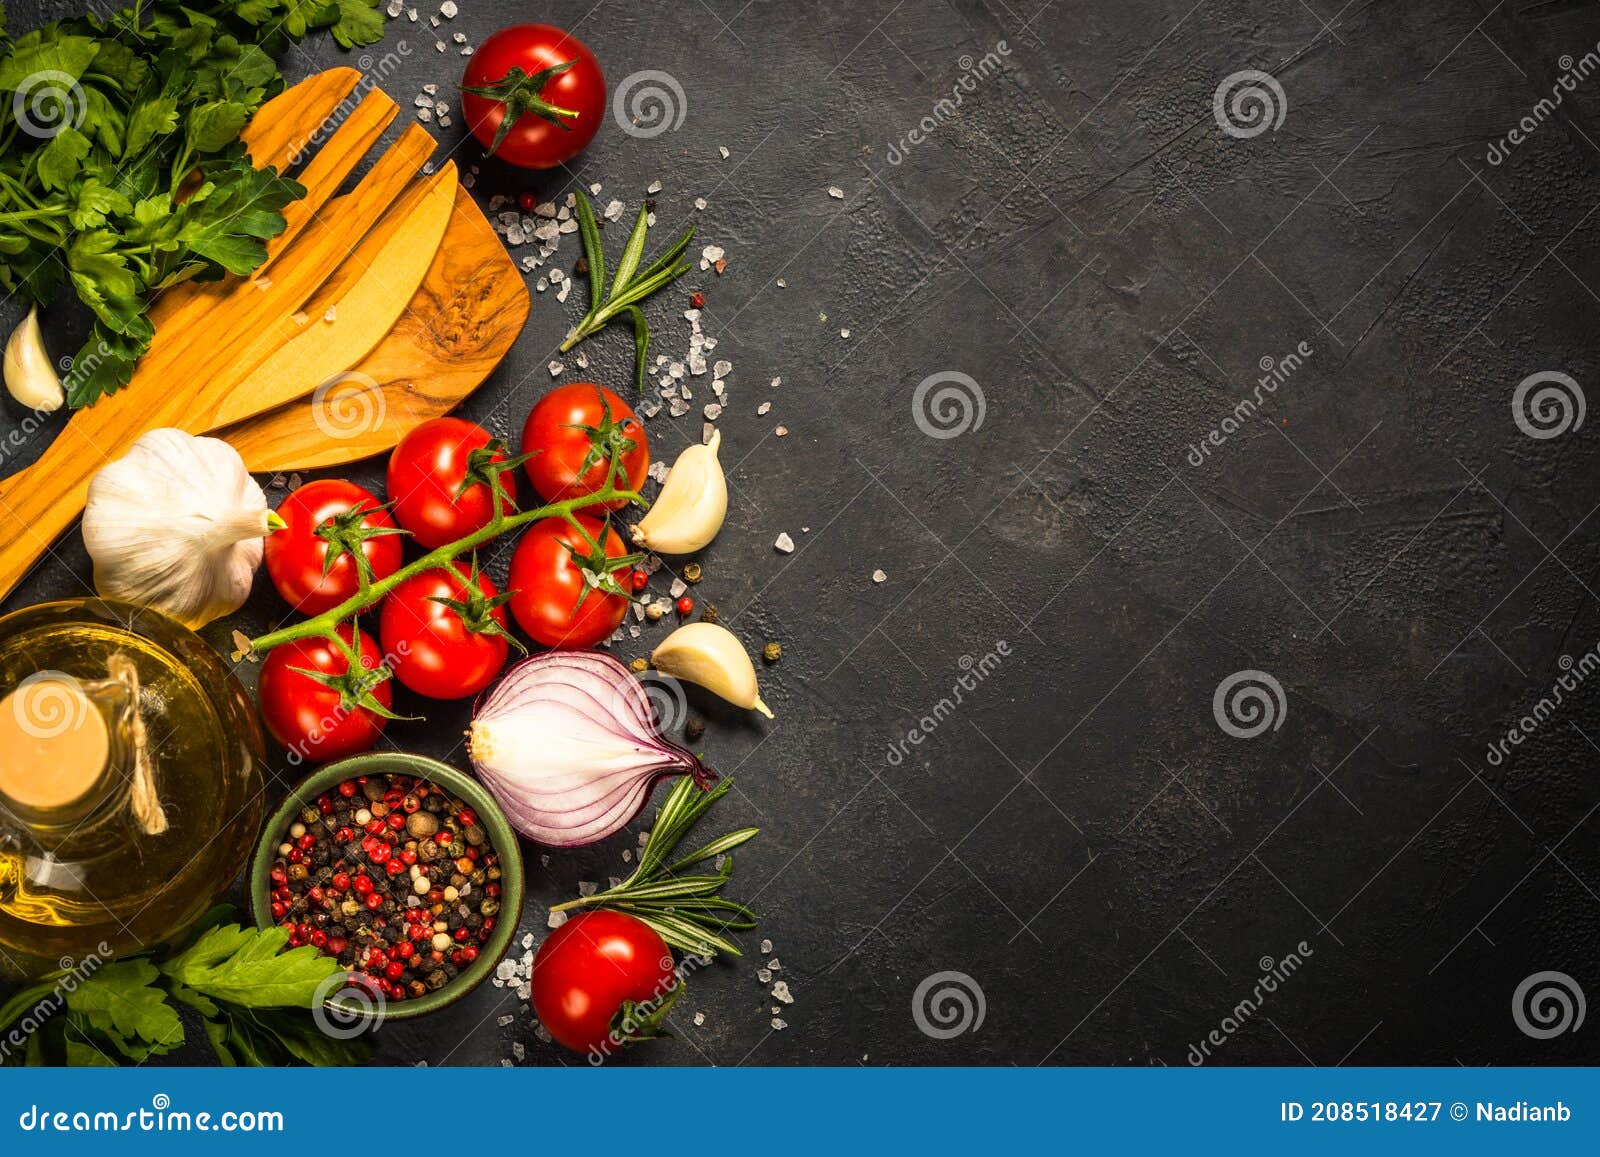 Food Cooking Background on Black Table. Stock Image - Image of menu ...